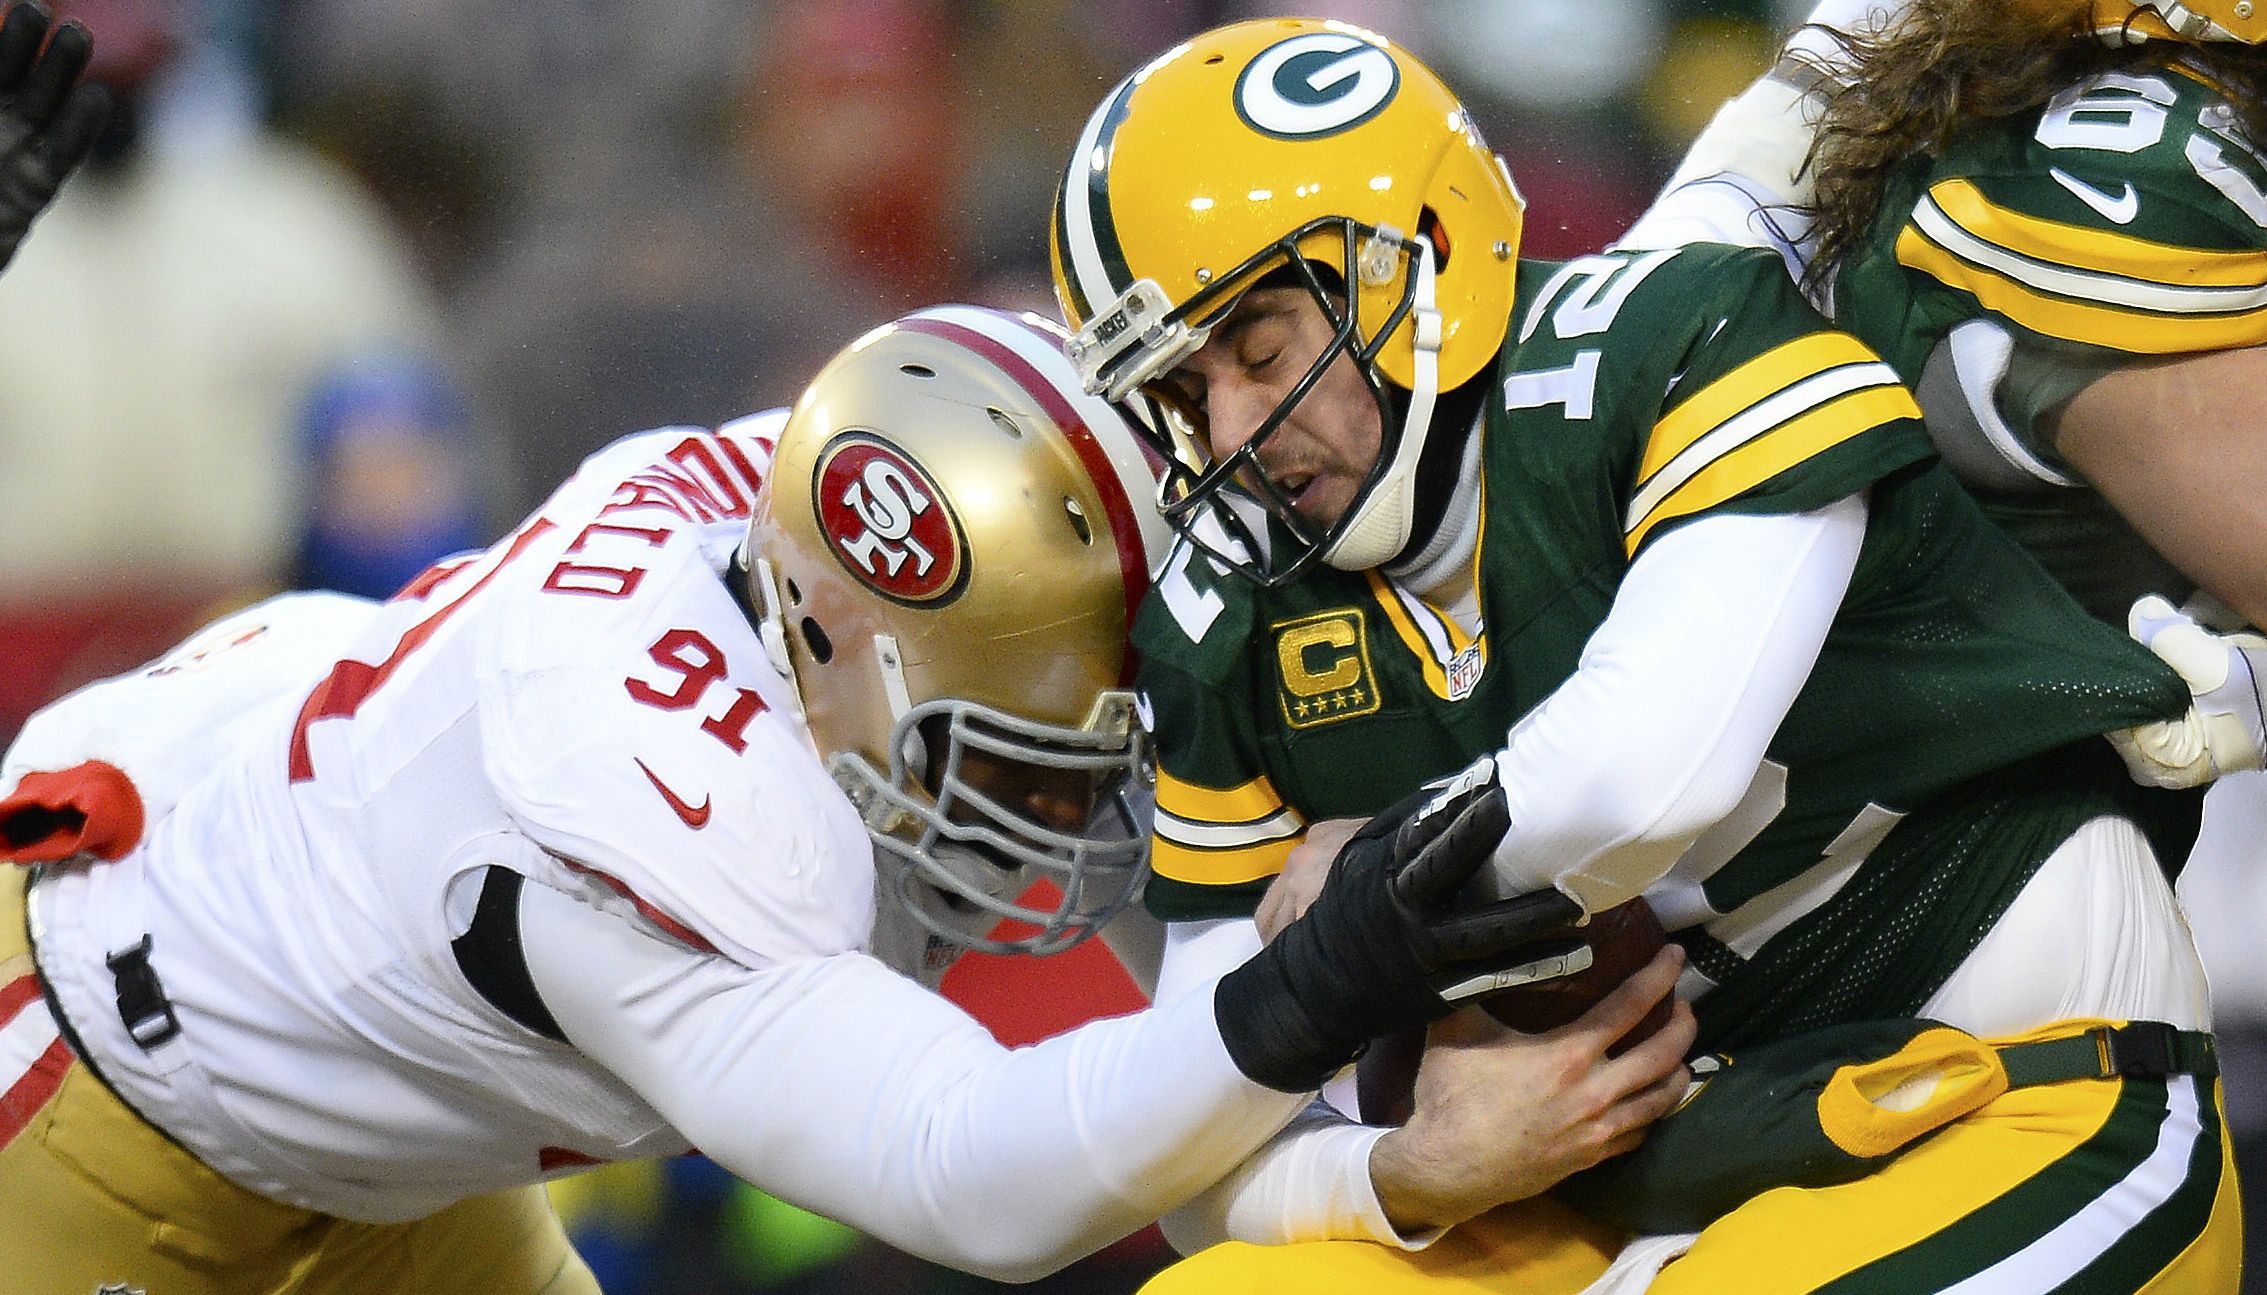 Aaron Rodgers getting sacked...Always awesome Image Courtesy of Fox News